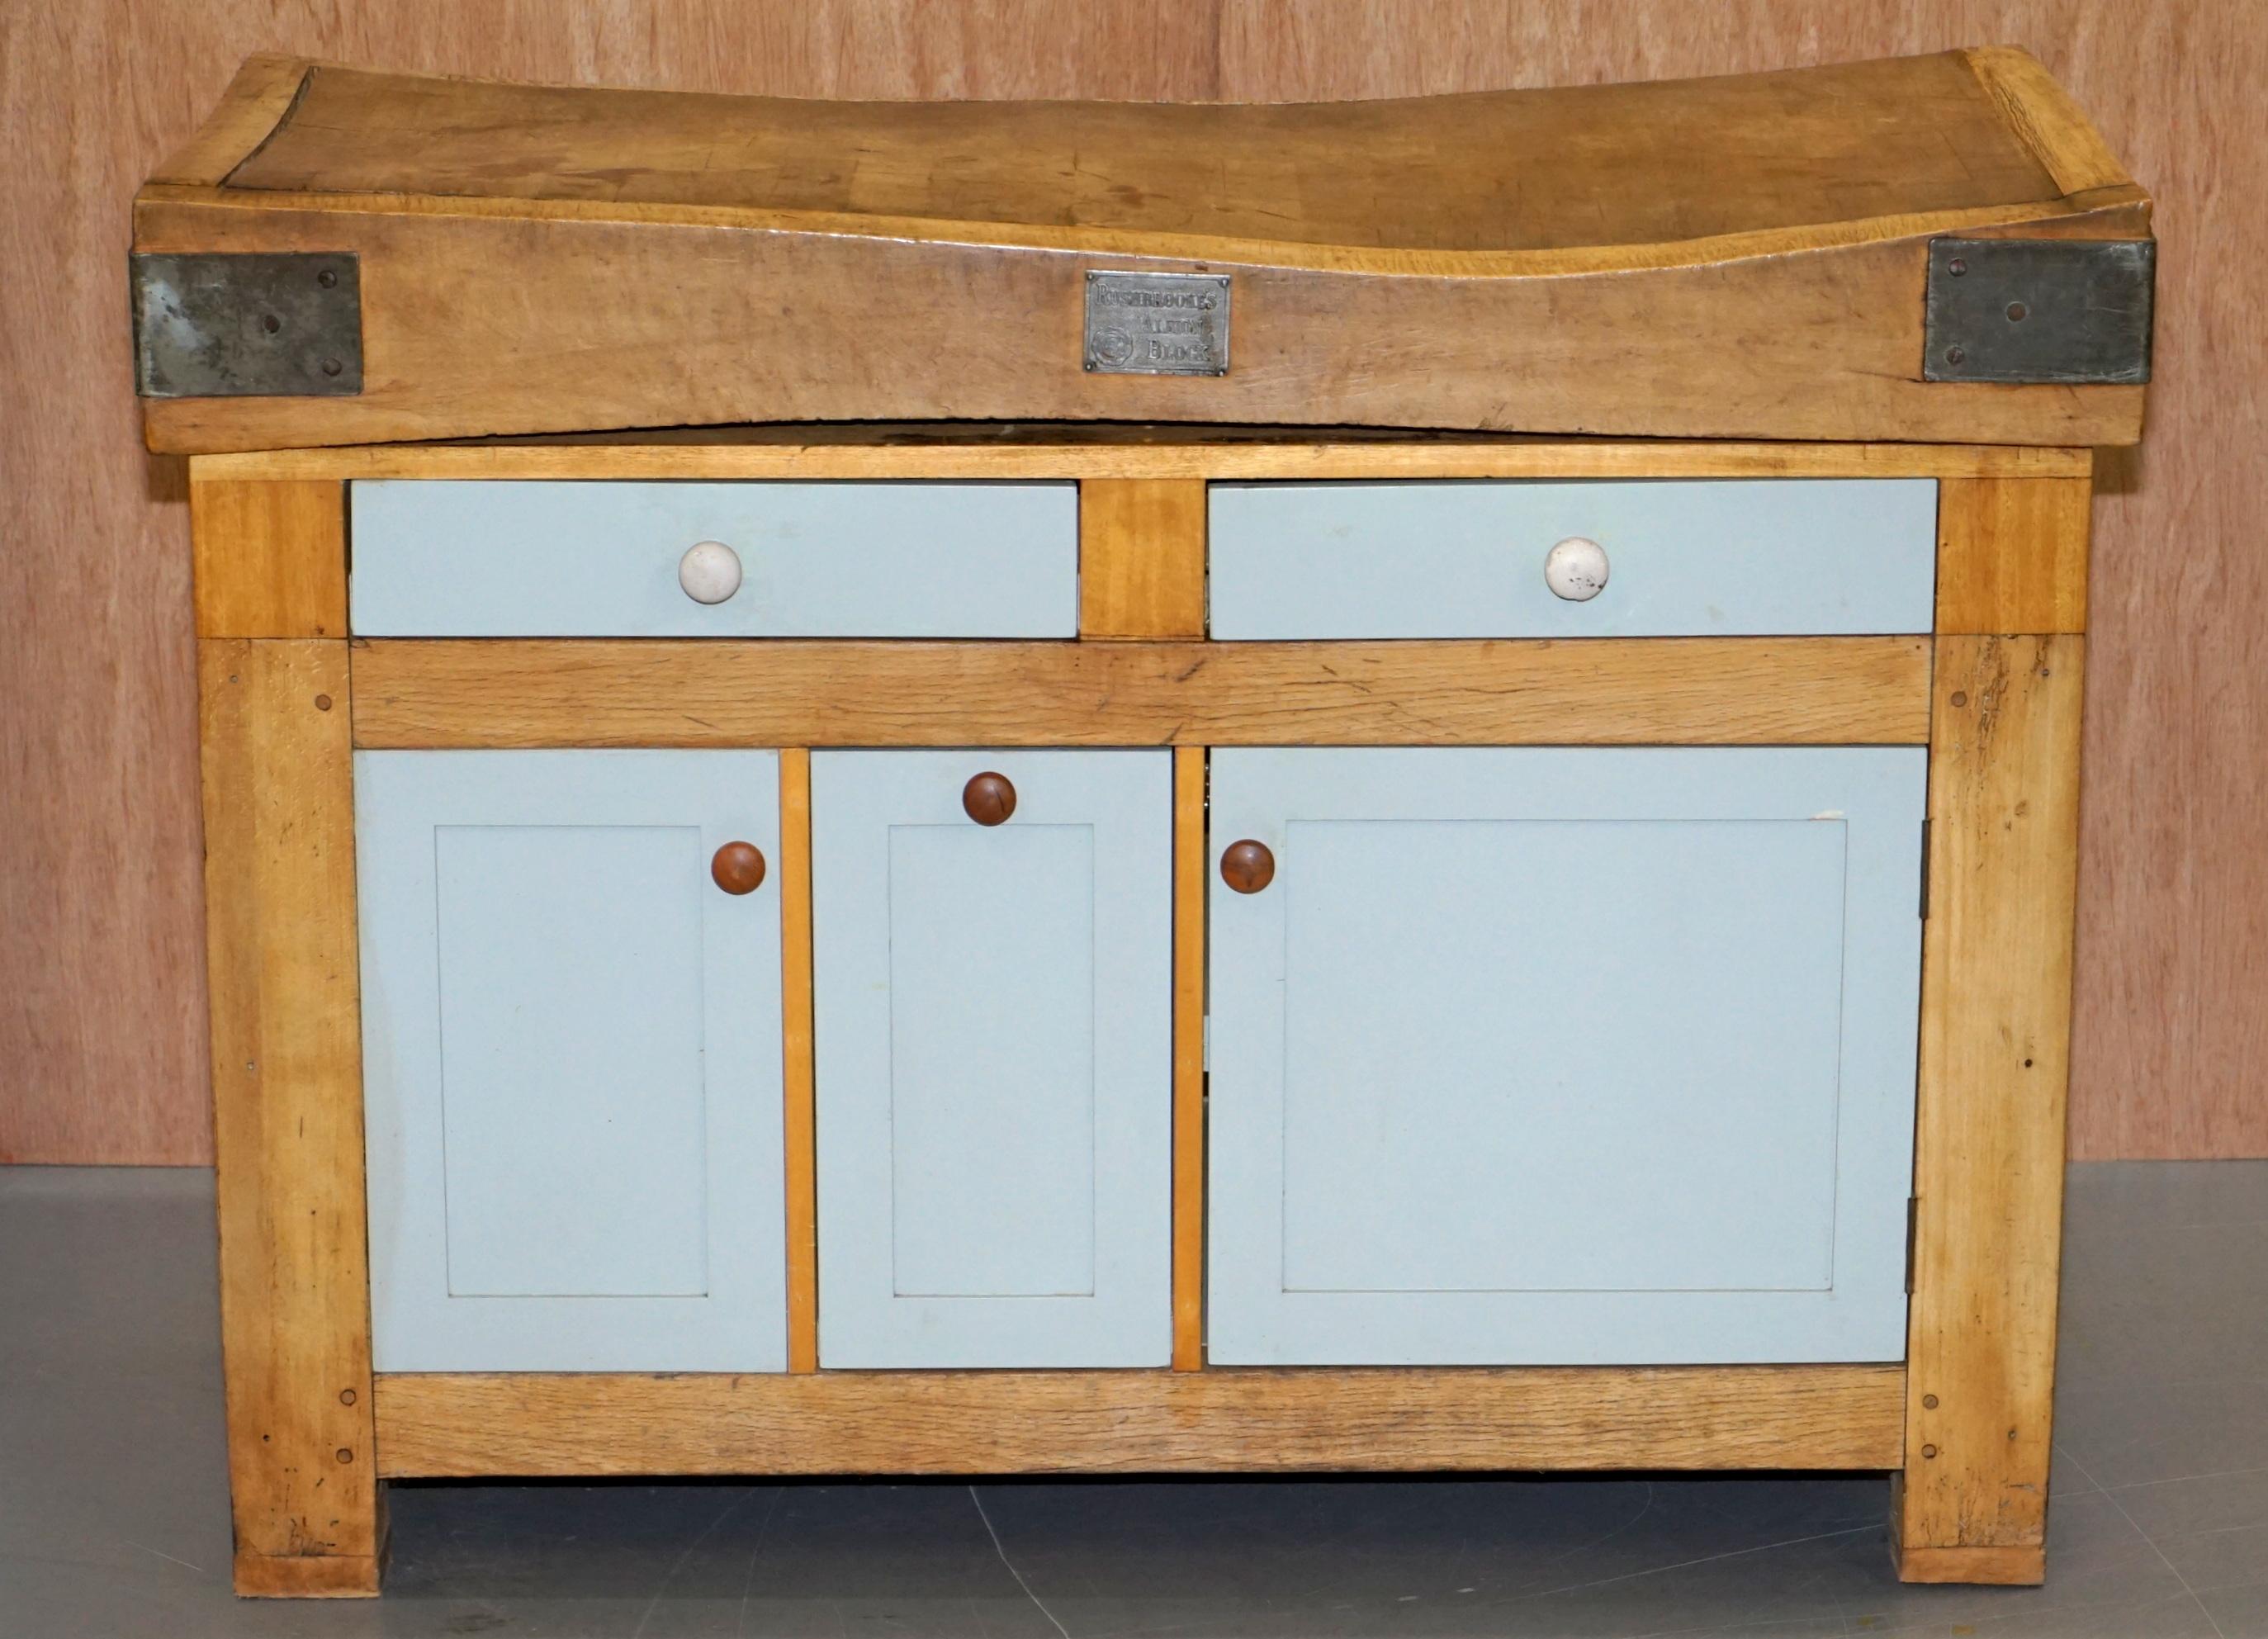 We are delighted to this original Rushbrook’s Albion butchers block fitted to a new custom made kitchen cupboard

A very cool piece of furniture, it has the original heavily used Rushbrook’s Albion top which has decades of wear and use fitted to a